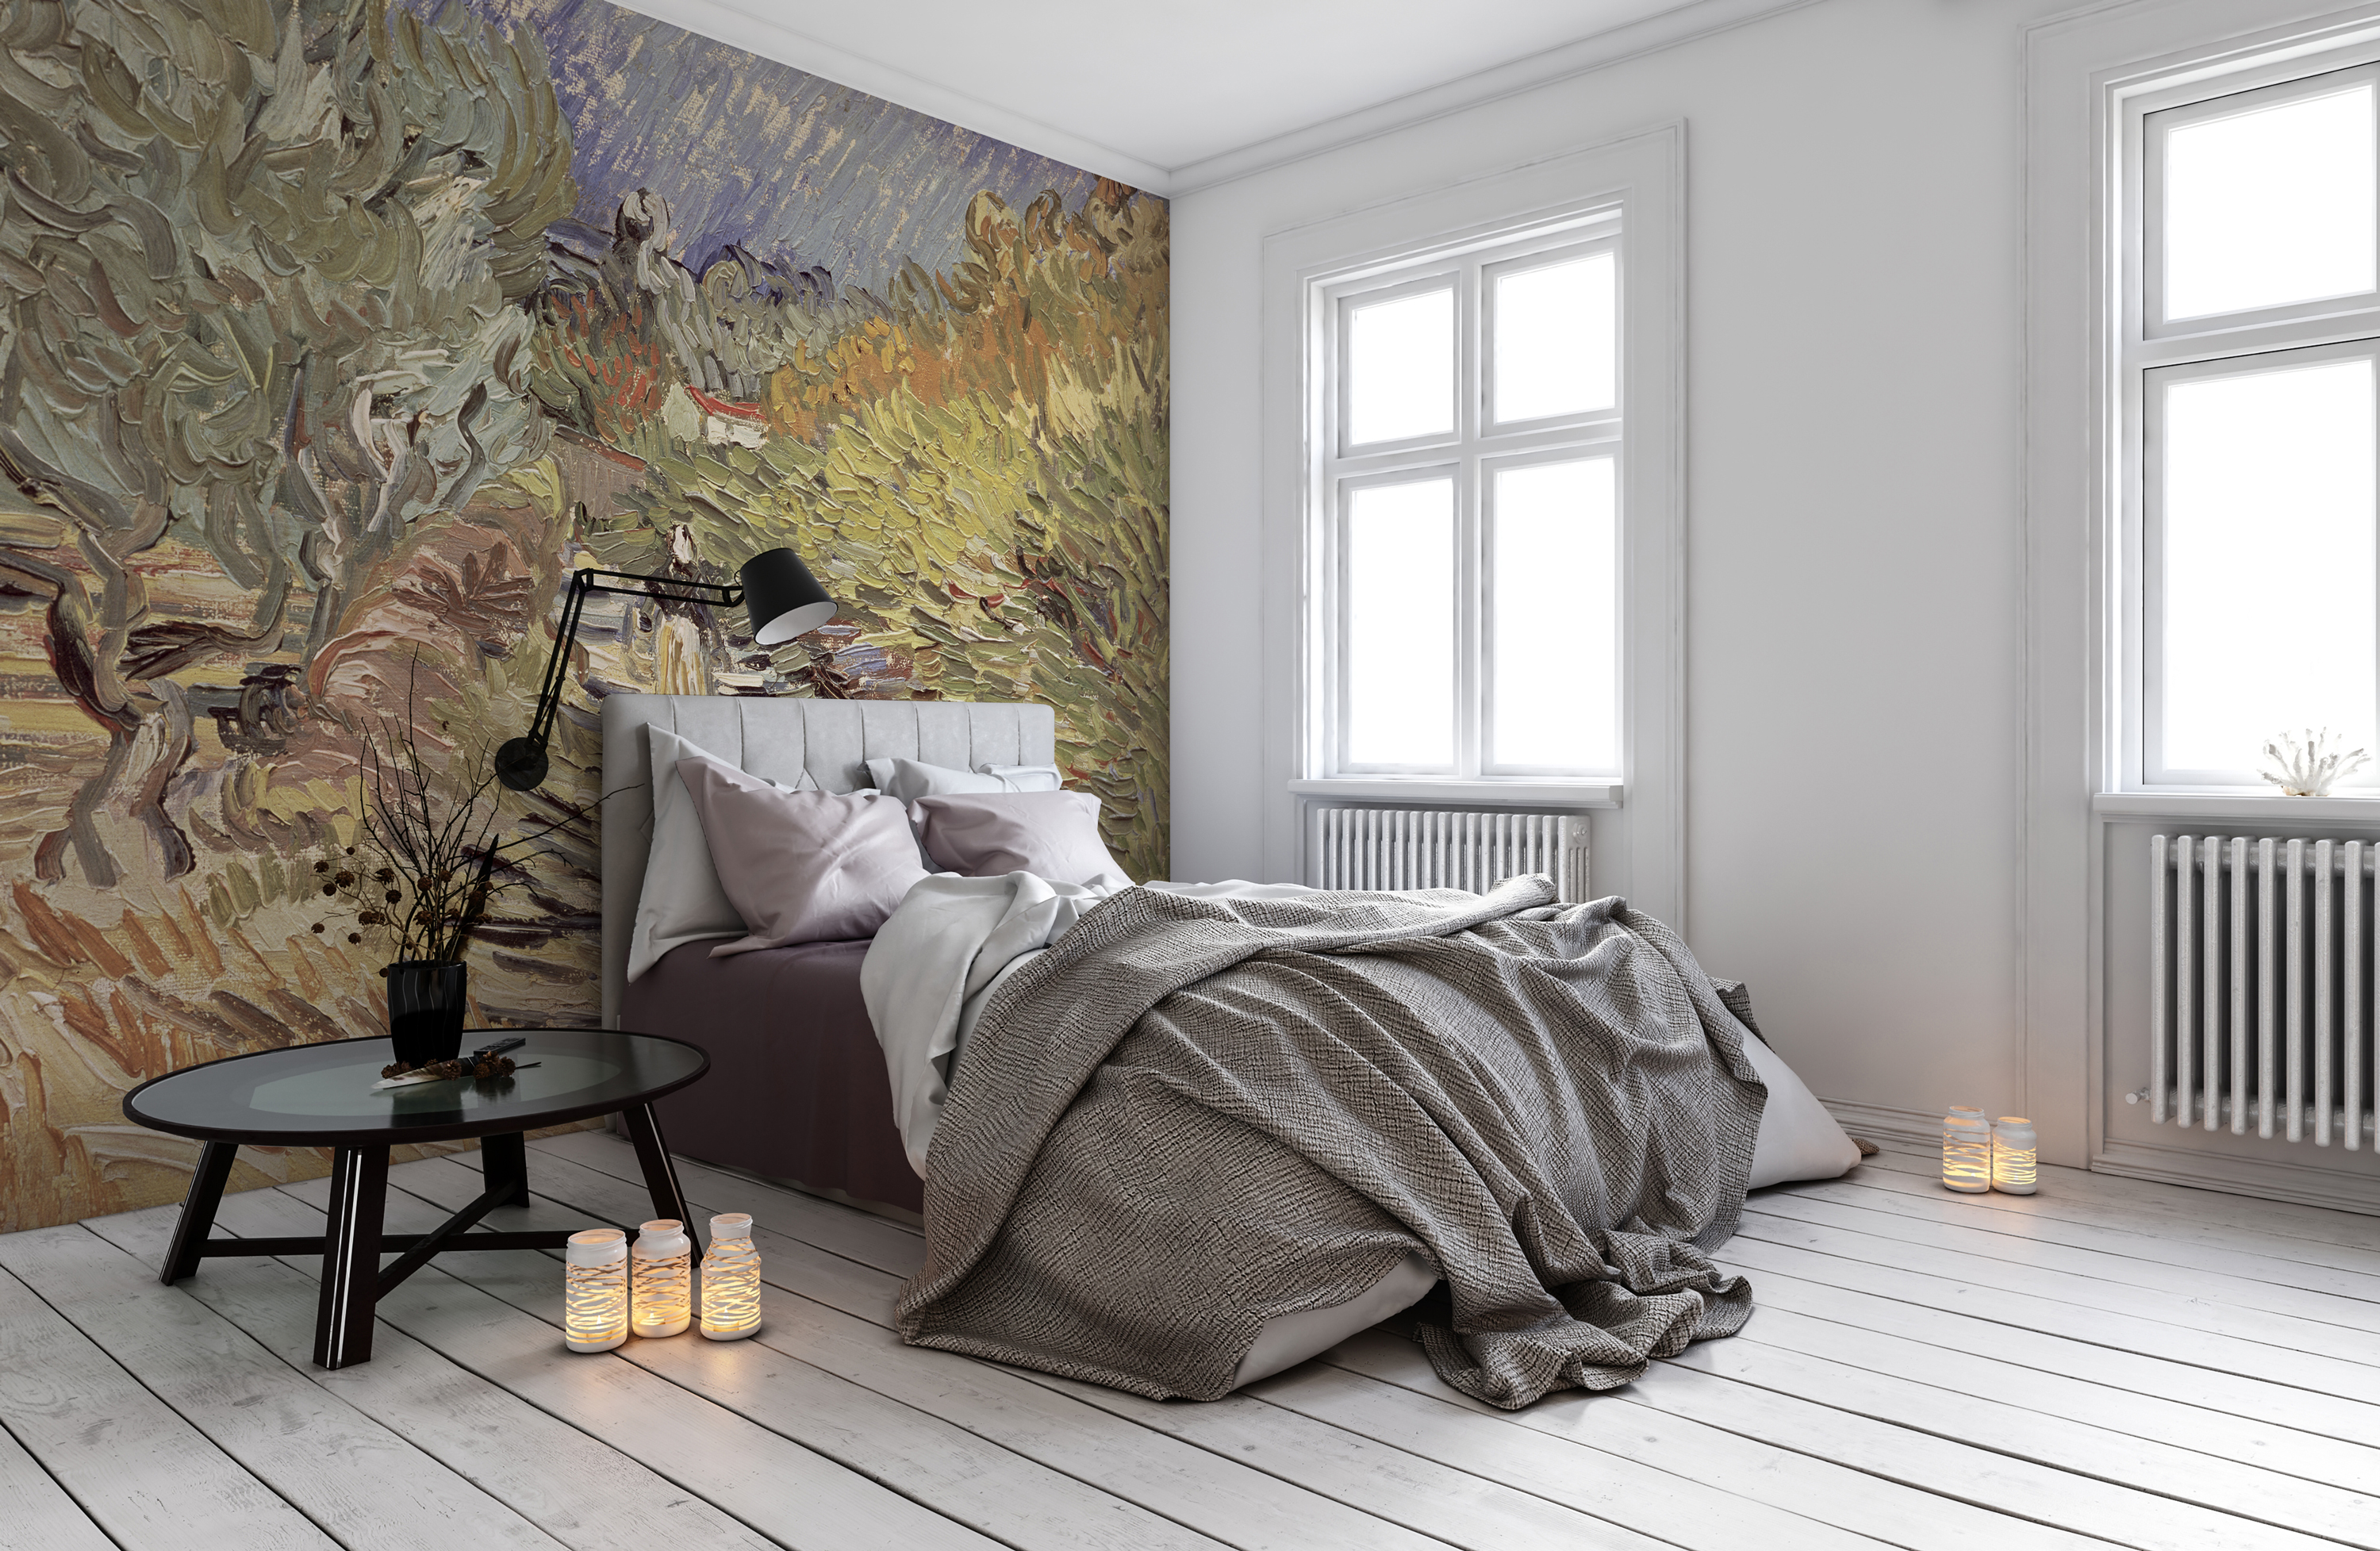 artistic painting wallpaper in stylish bedroom